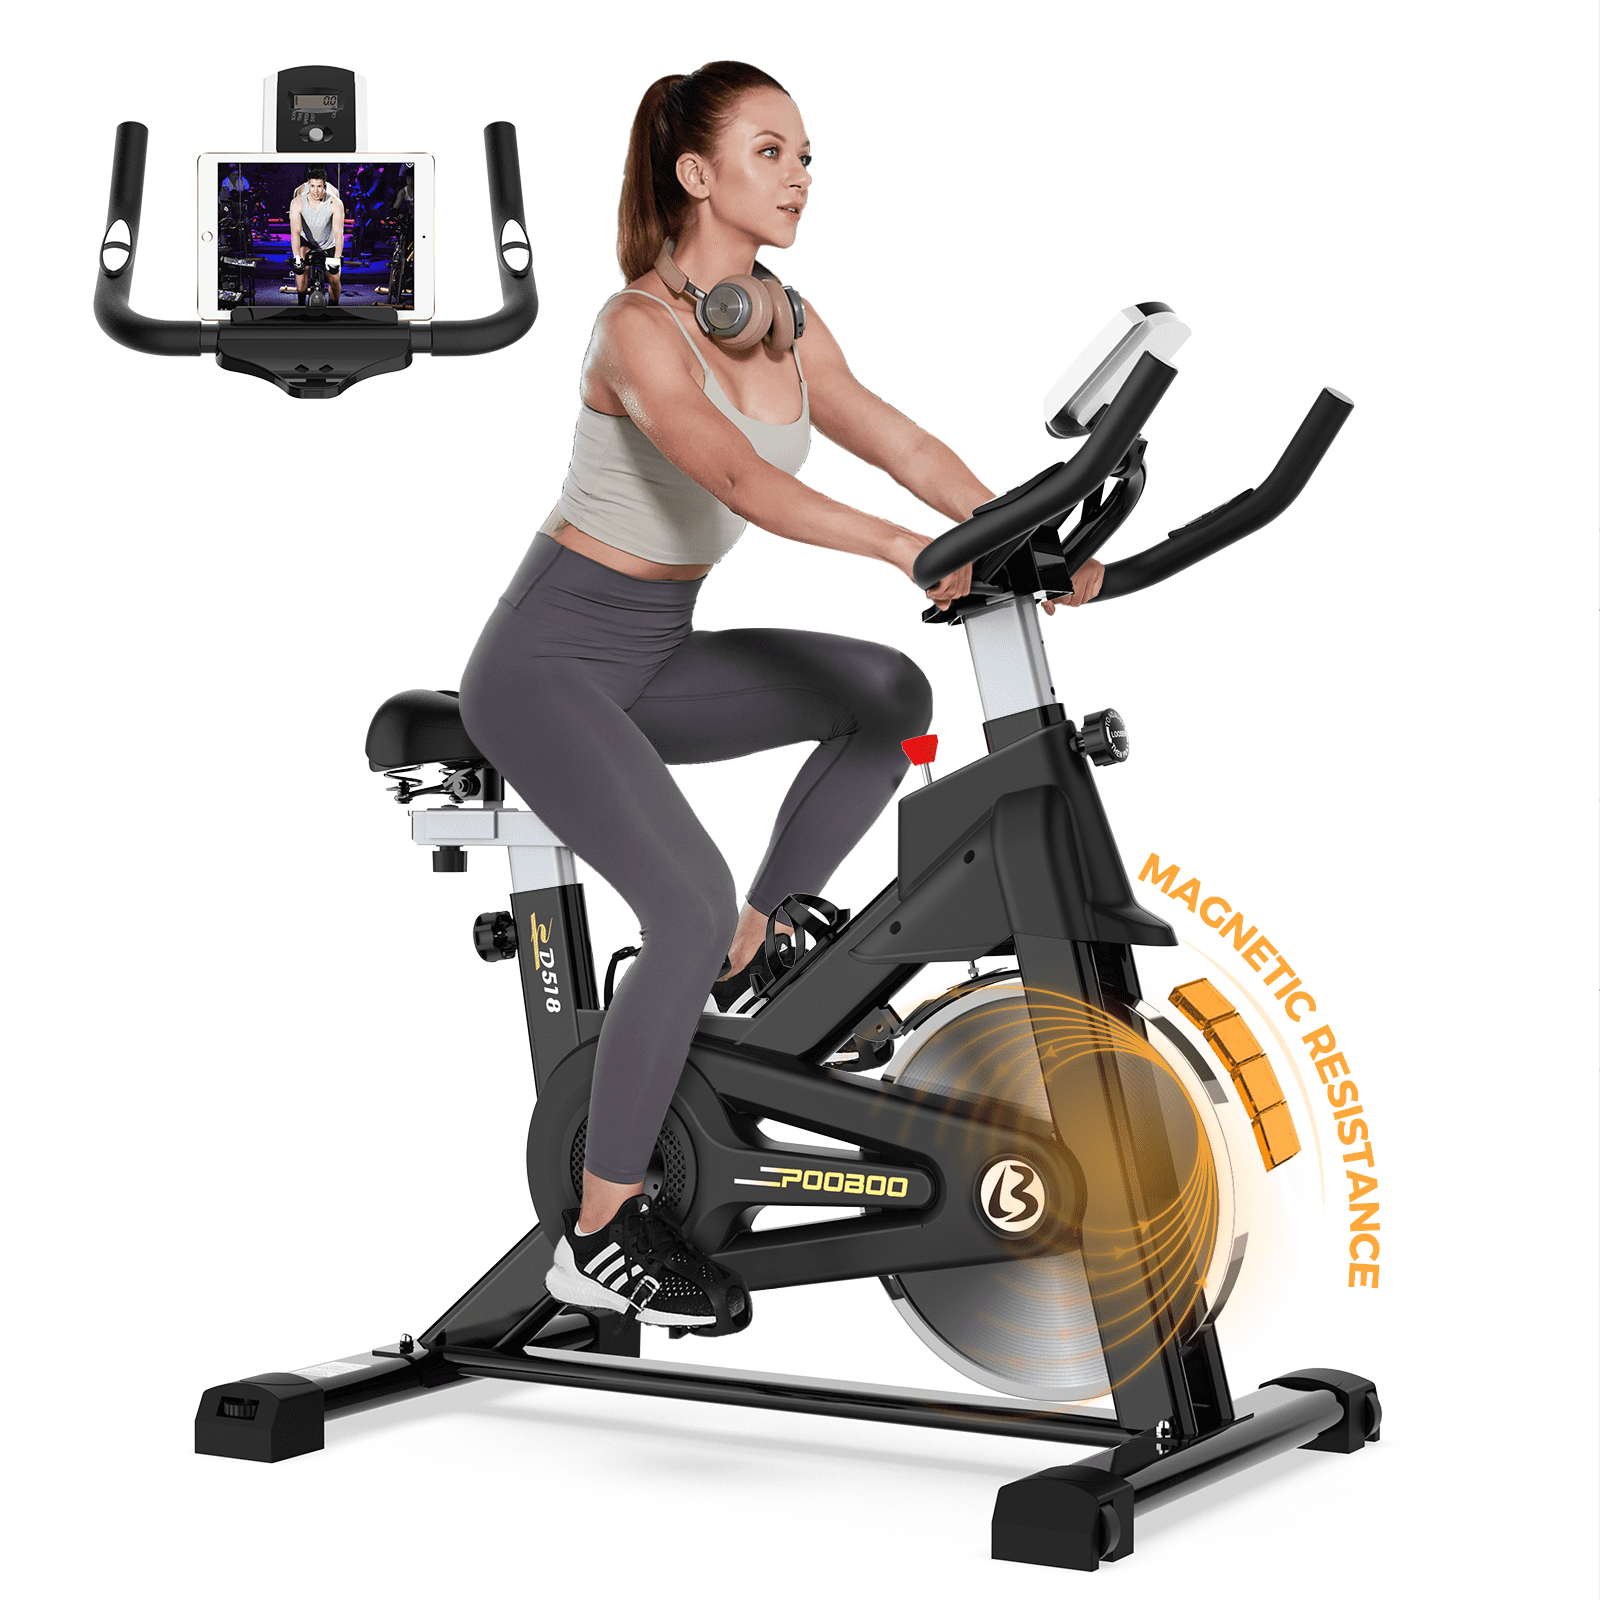 Details about   ANCHEER Indoor 3-In-1 Exercise Bike Slim Folding Bike Stationary Magnetic Cycle 